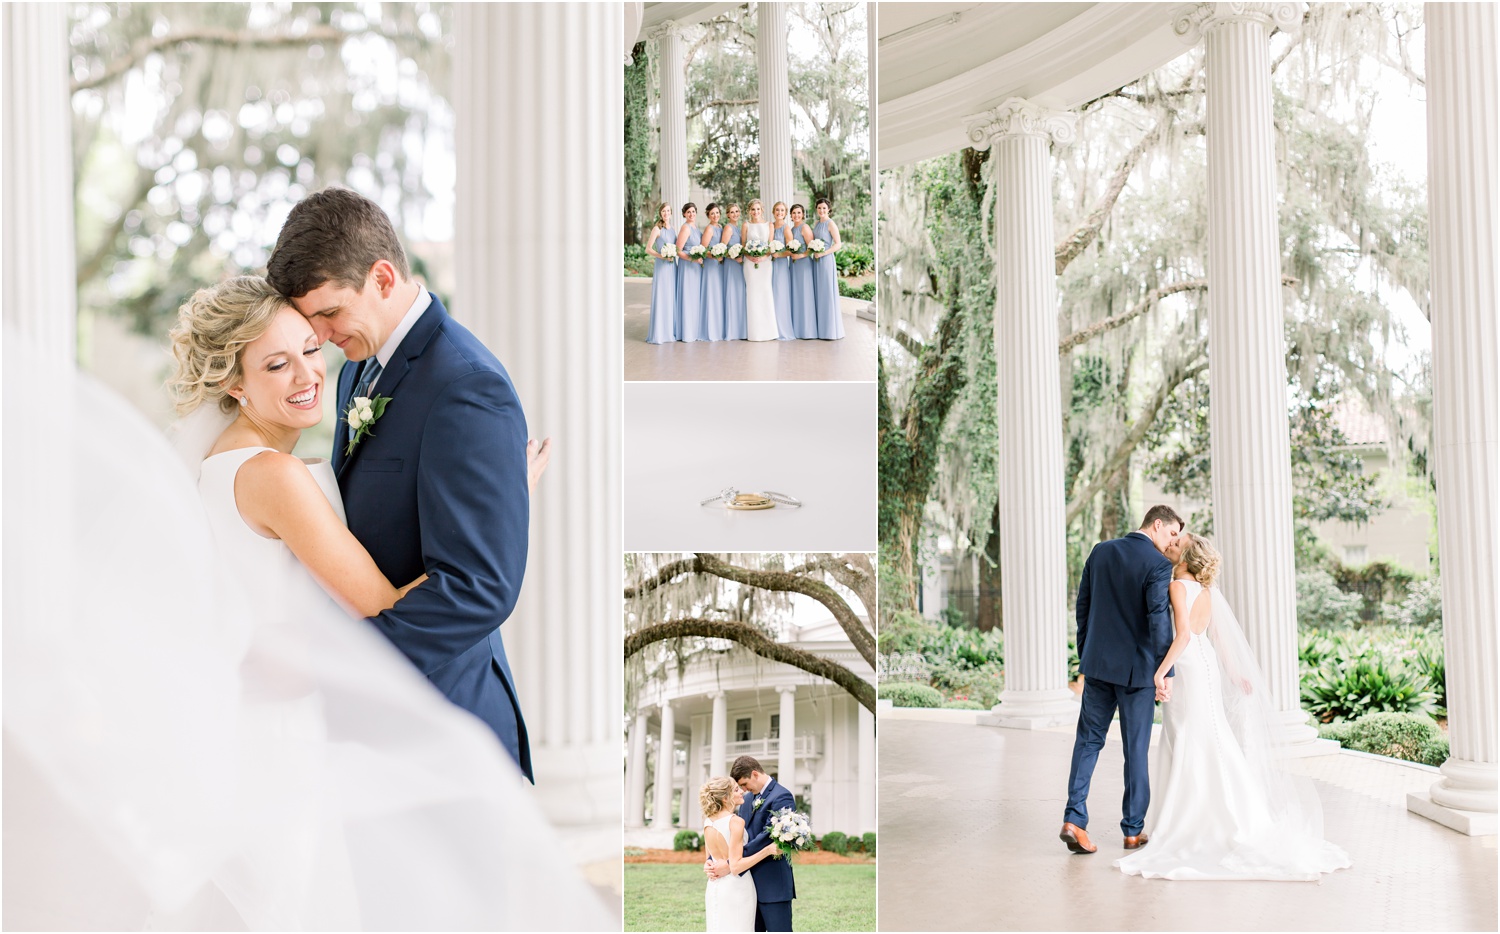 A southern wedding at the crescent in valdosta, georgia.